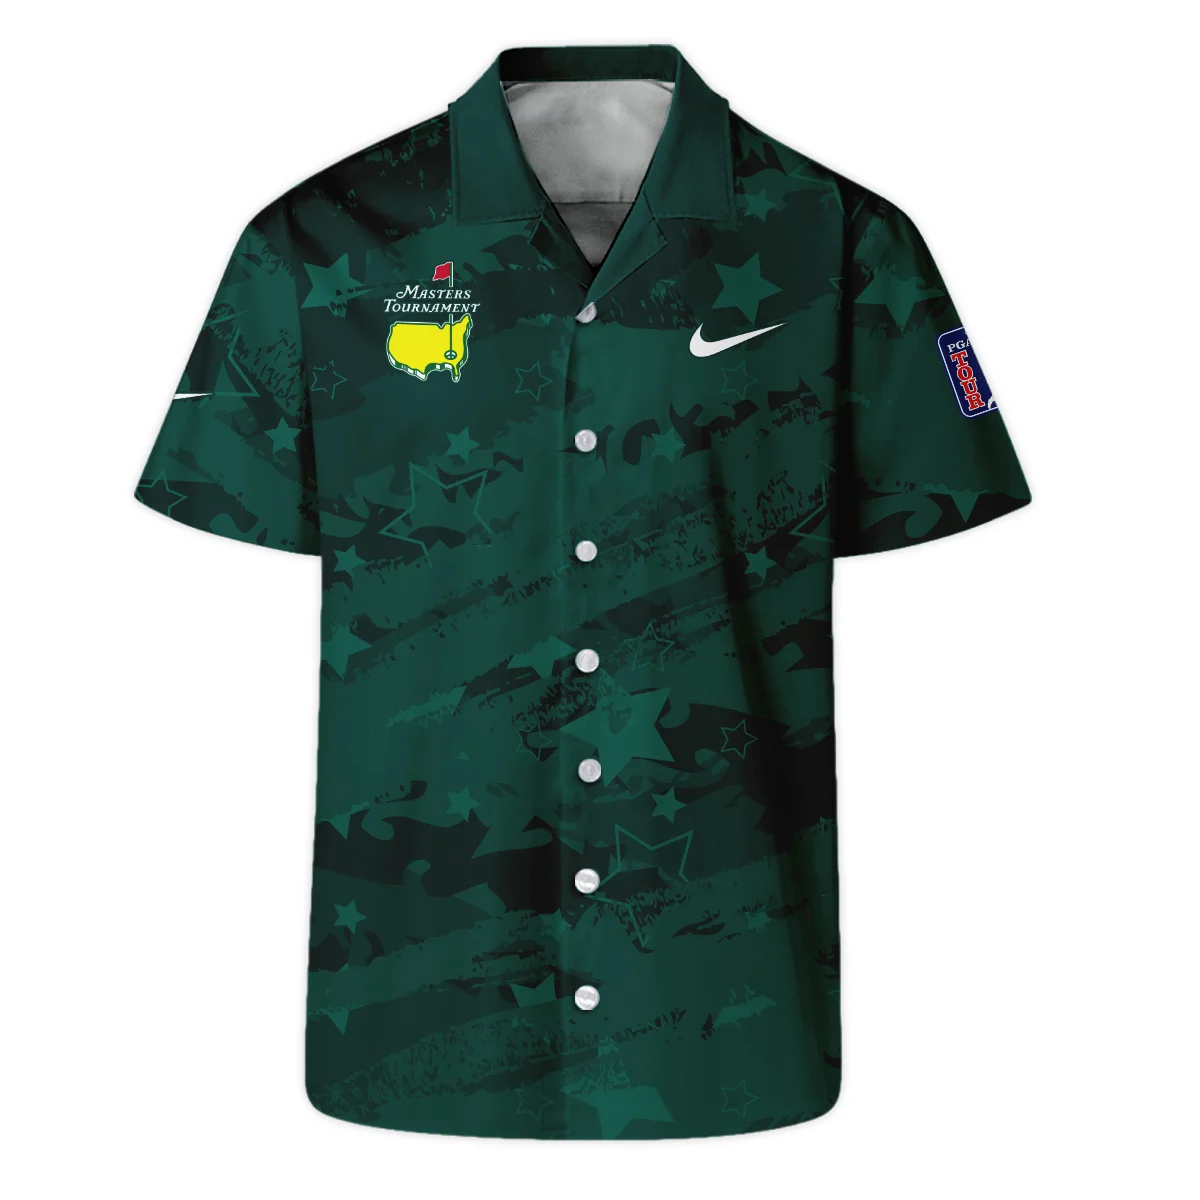 Dark Green Stars Pattern Grunge Background Masters Tournament Nike Polo Shirt Style Classic Polo Shirt For Men